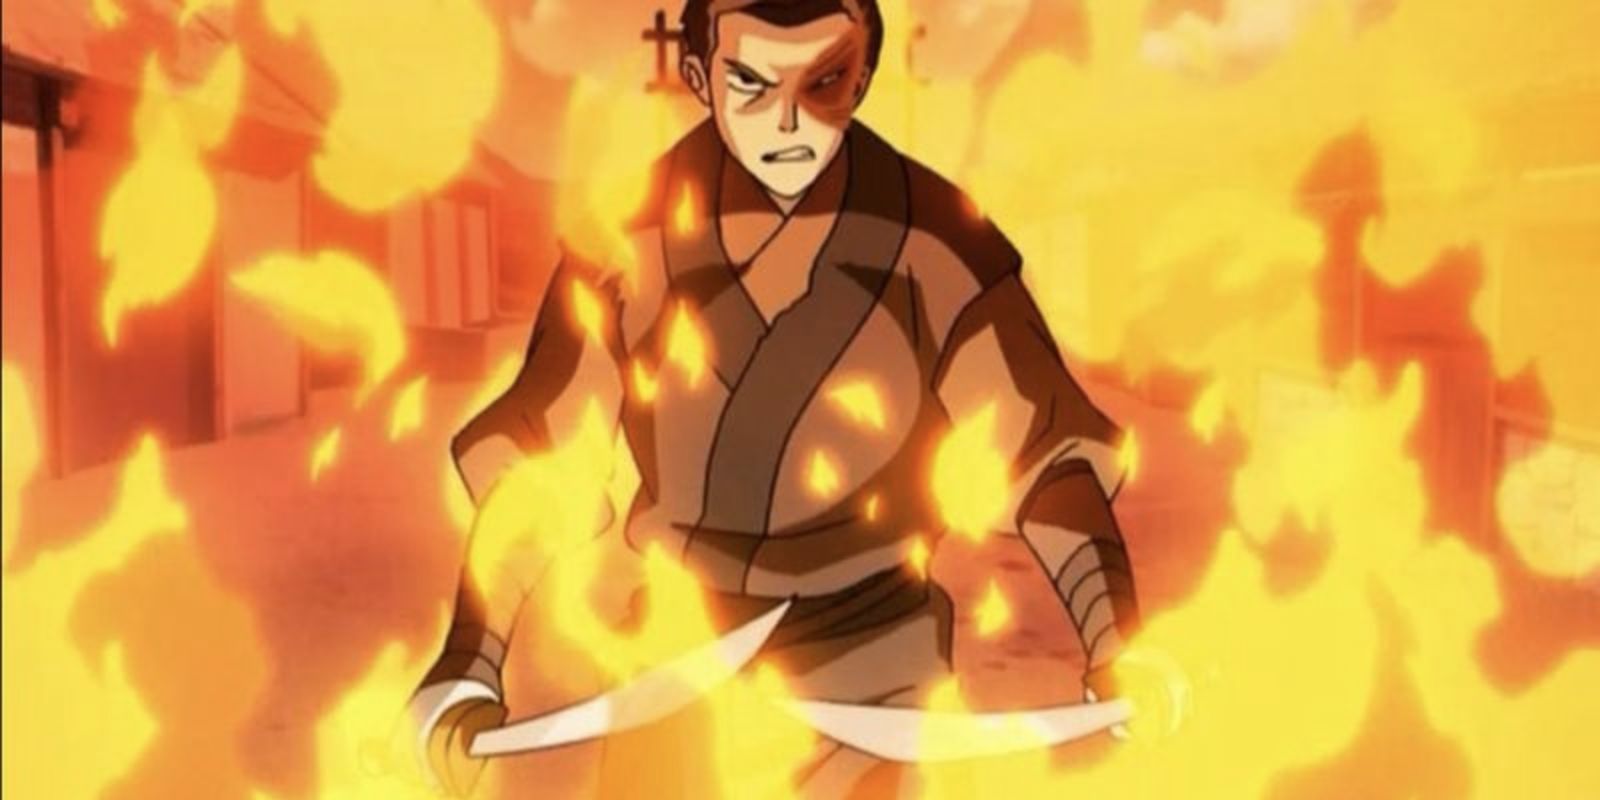 Zuko surrounded by flame in The Last Airbender